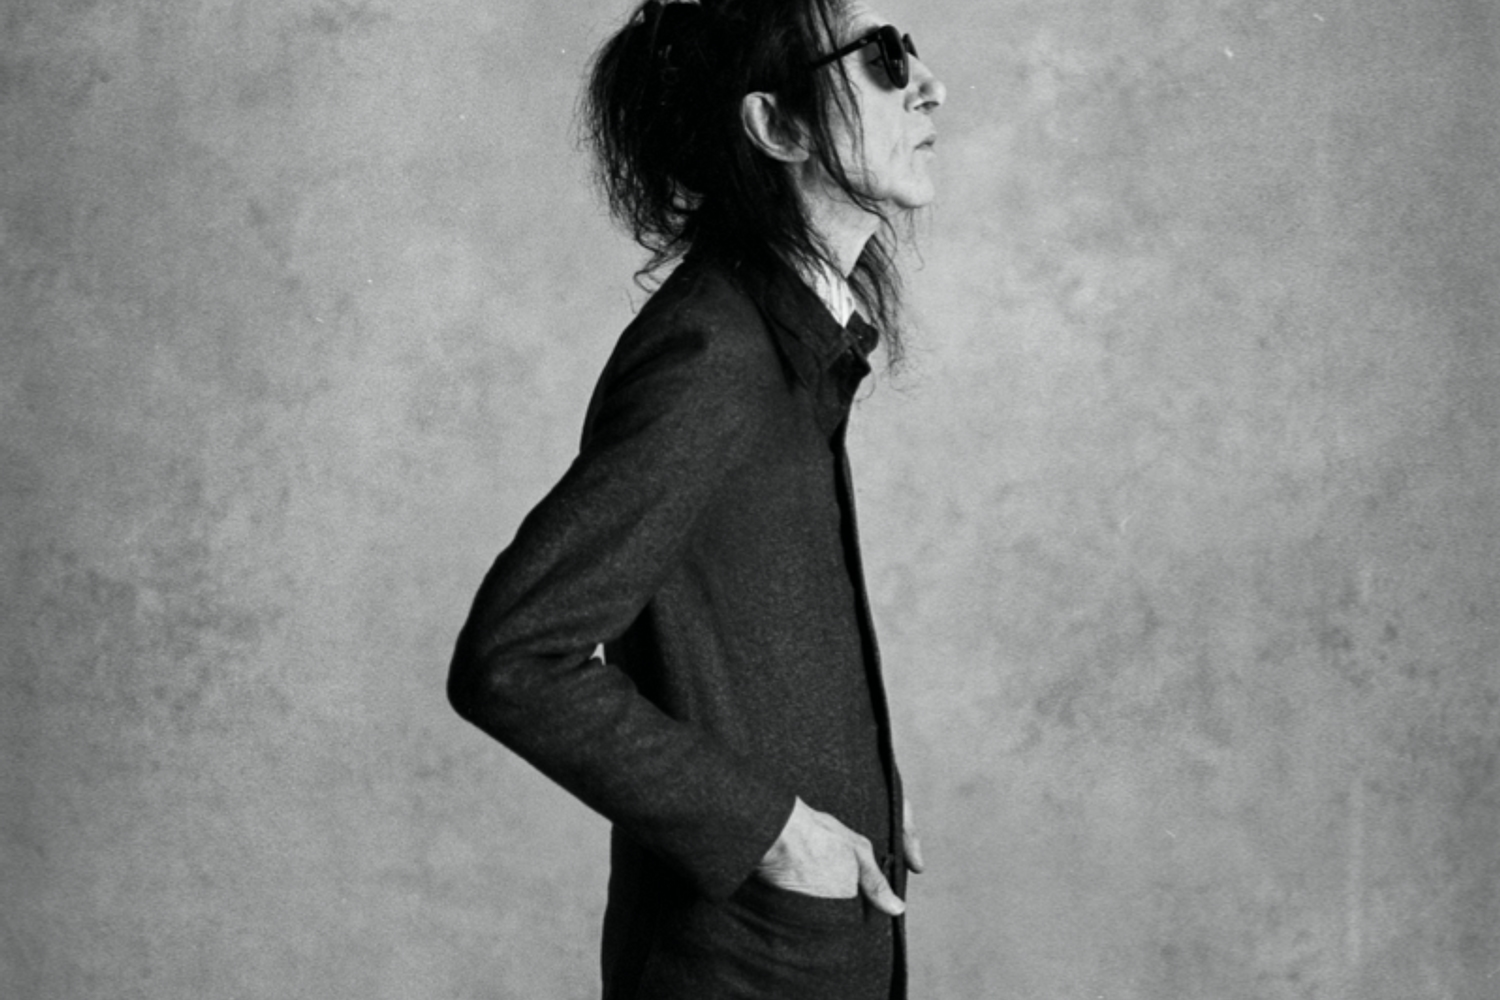 John Cooper Clarke announces ‘I Wanna Be Yours At Christmas’